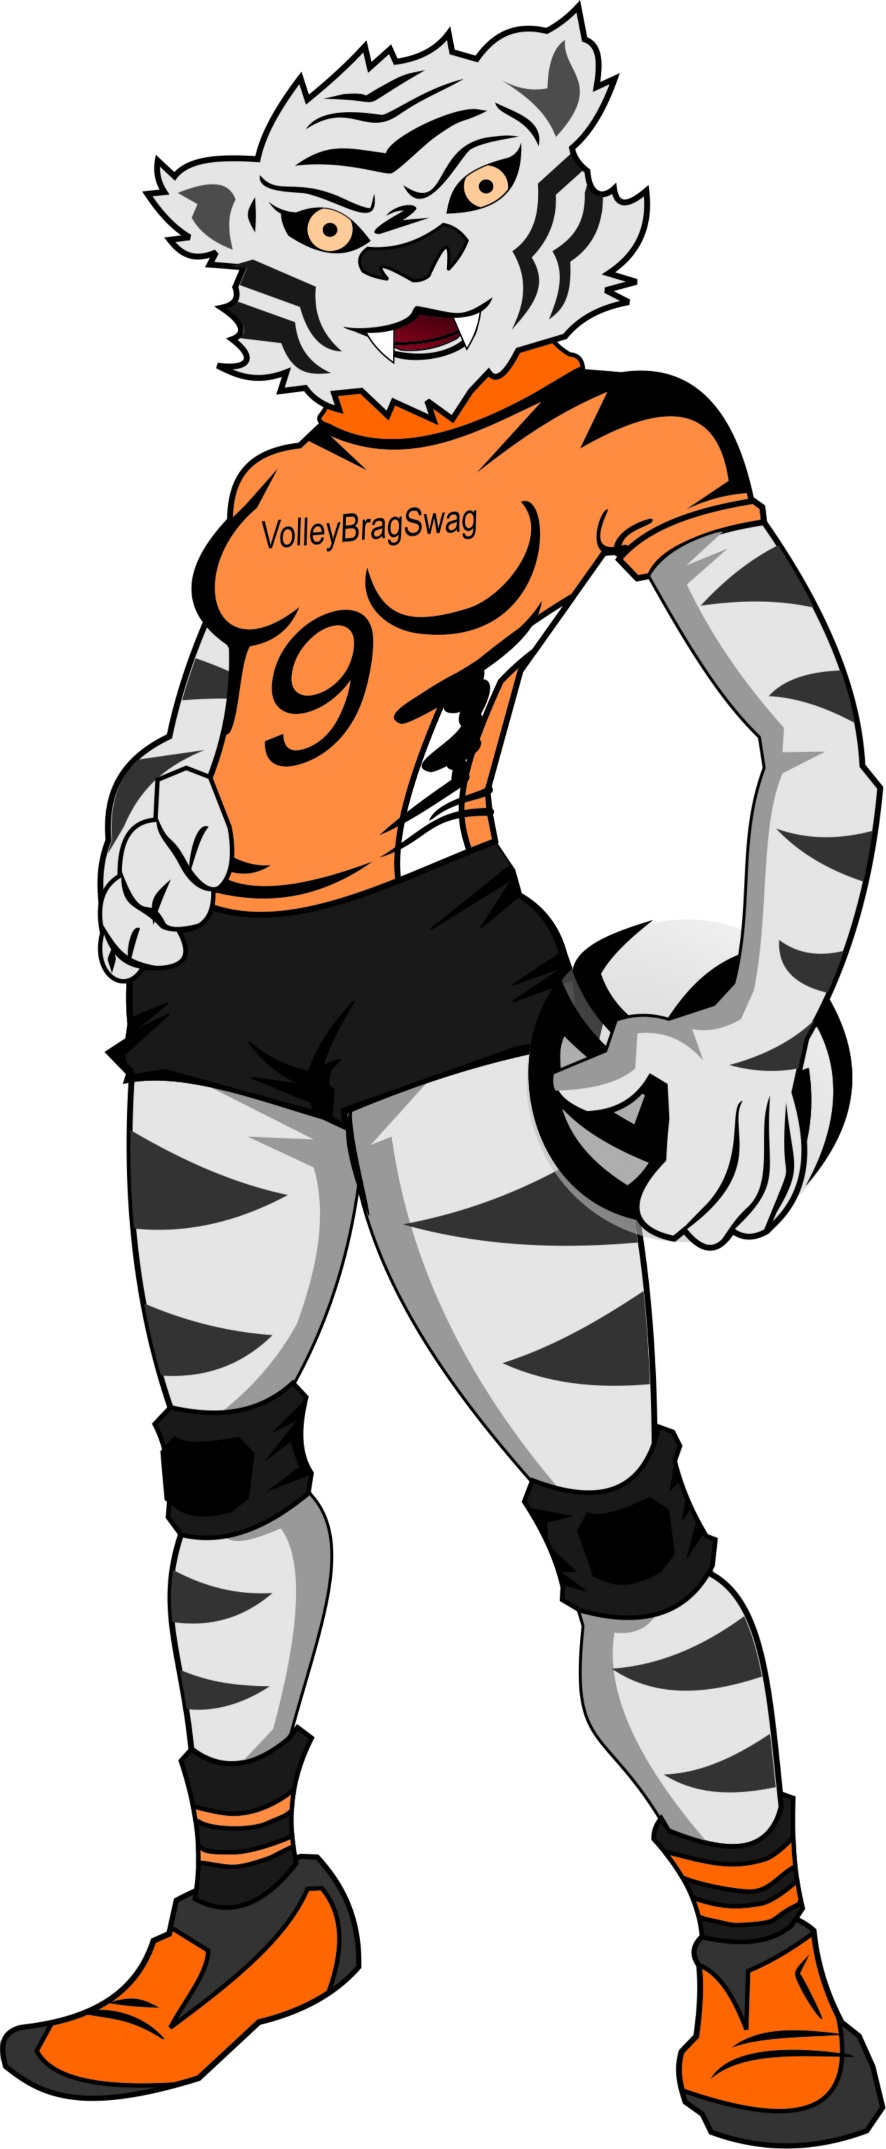 Tiger coloring pages feature Volleybragswag Star the Jump Serving Specialist White Tiger named Tatoo a member of the Volleybragswag All Beast Team. 